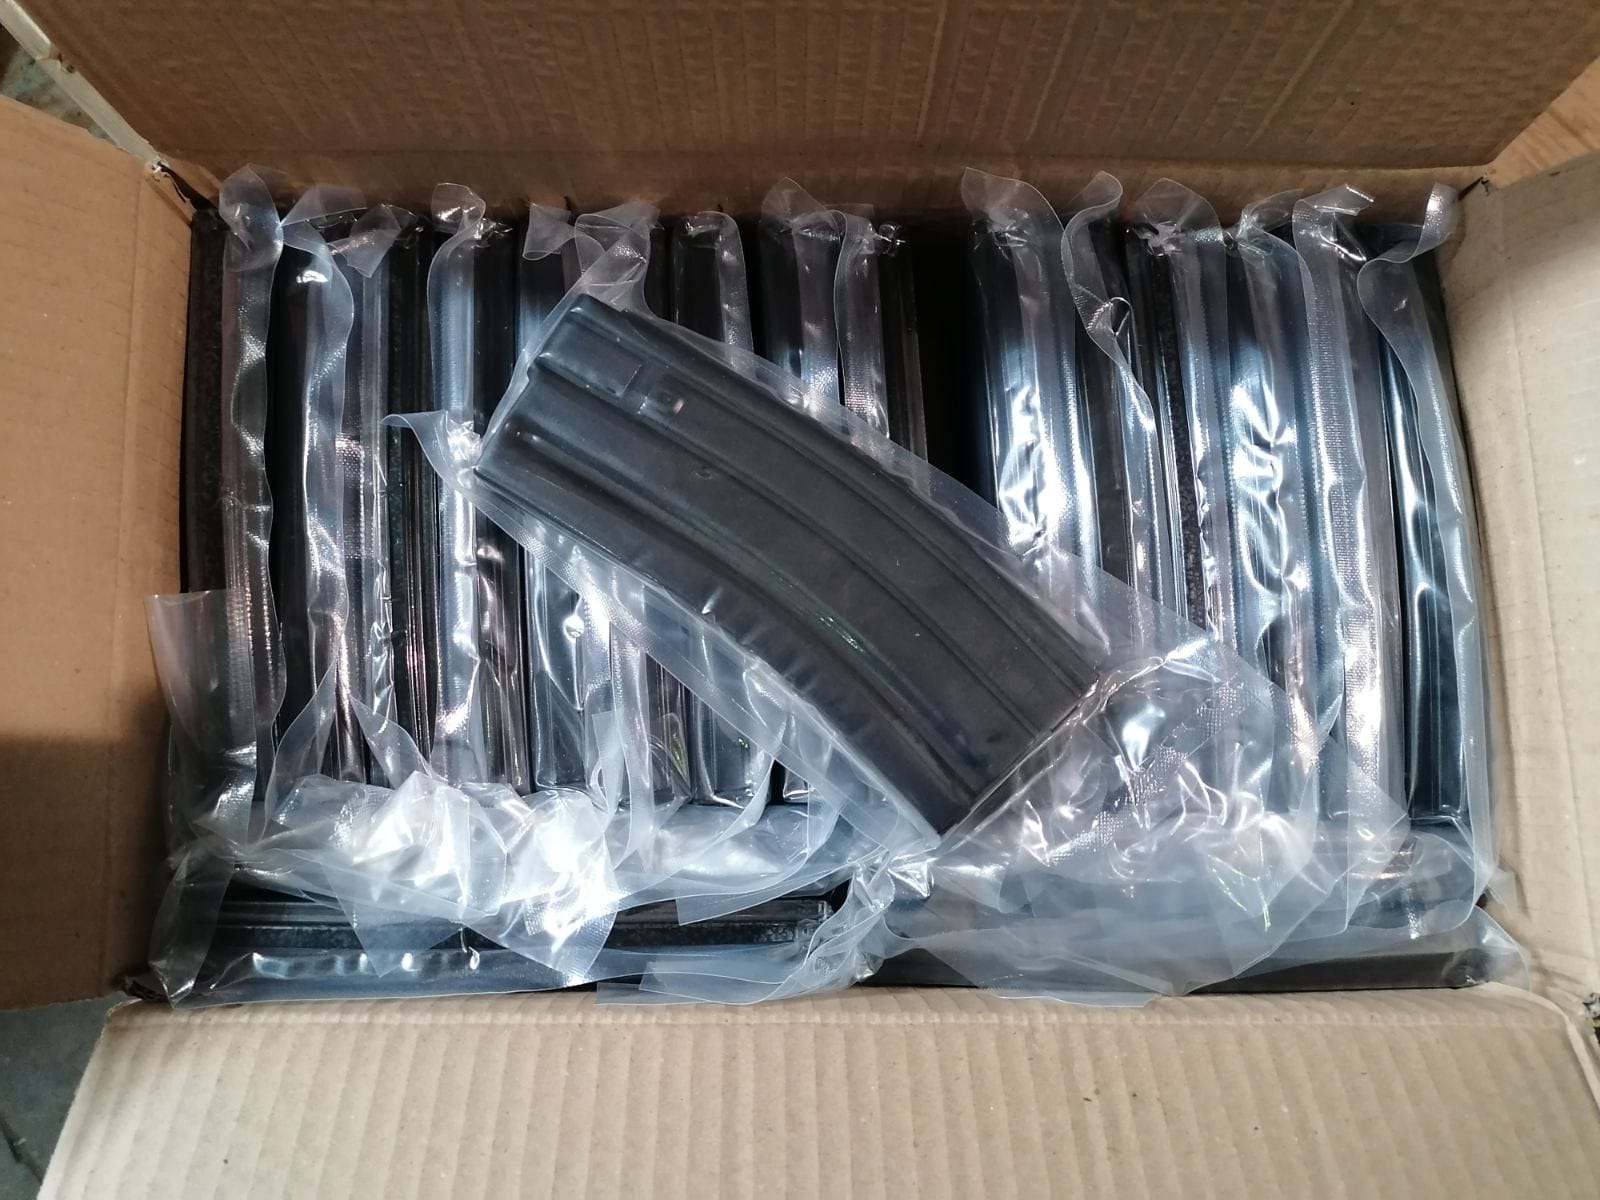 Magazines for AR 15